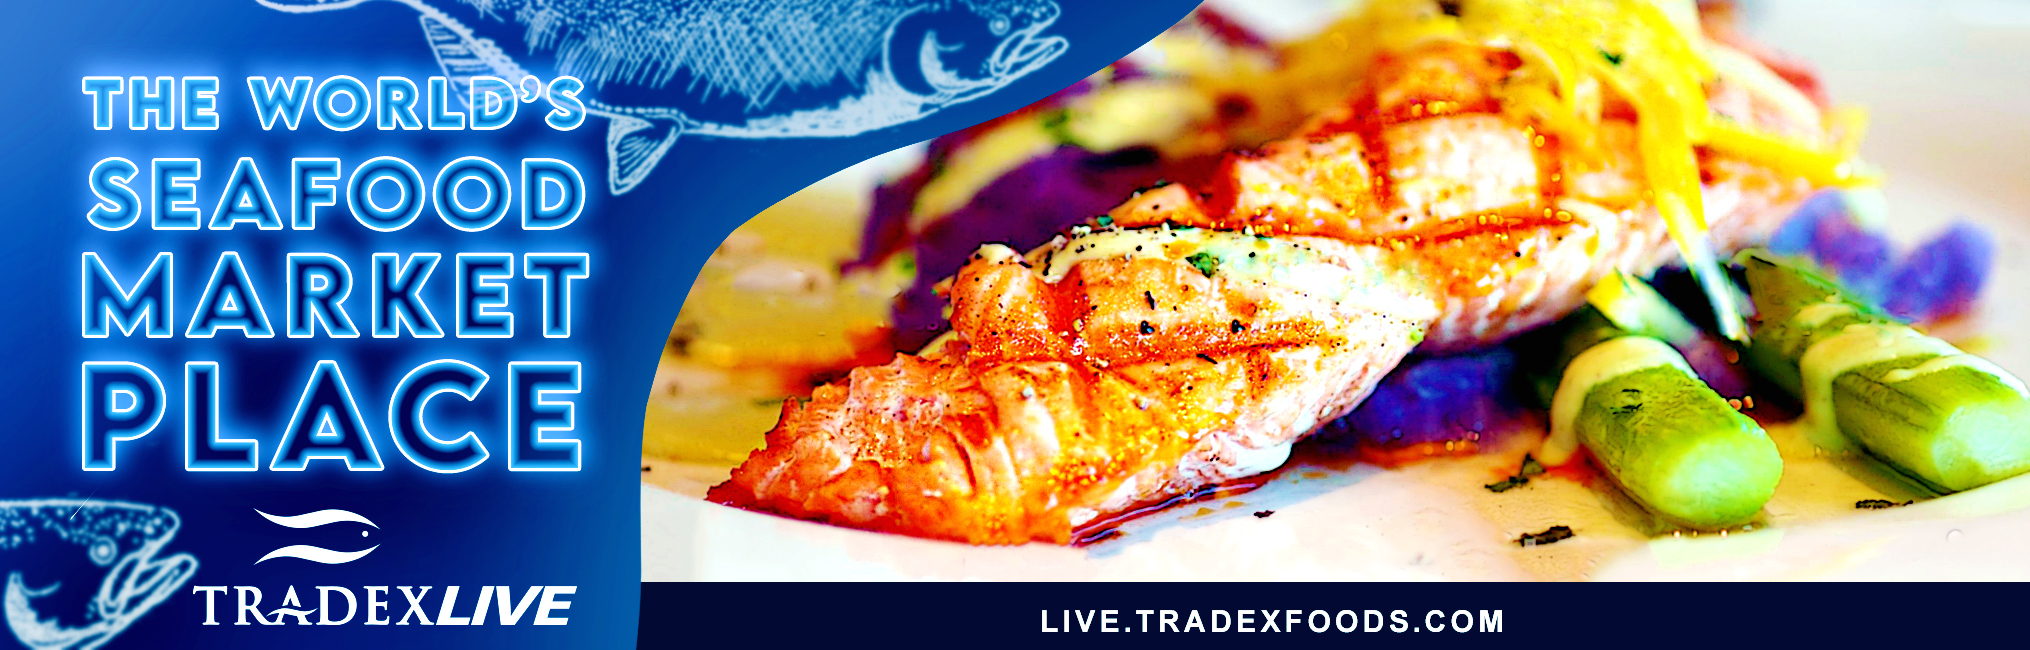 THE WORLD'S SEAFOOD MARKET PLACE - TRADEXLIVE